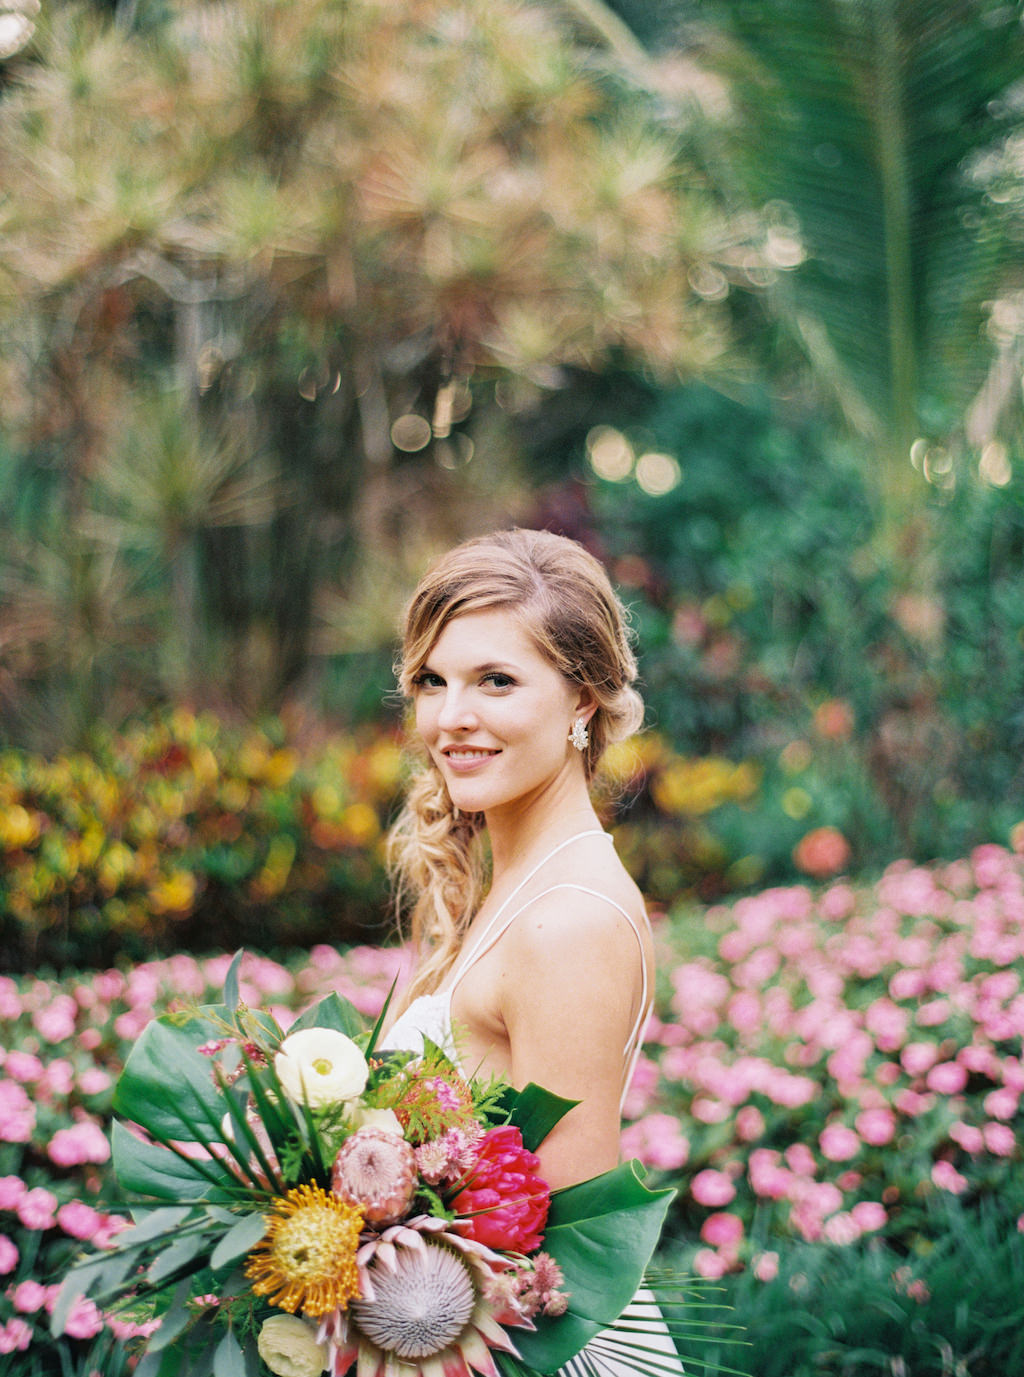 Outdoor Bridal Portrait A-Line Strappy Lace Wedding Dress, Braided Hair with White Flowers and Greenery, White, Pink King Protea and Yellow Tropical Inspired Floral Bouquet